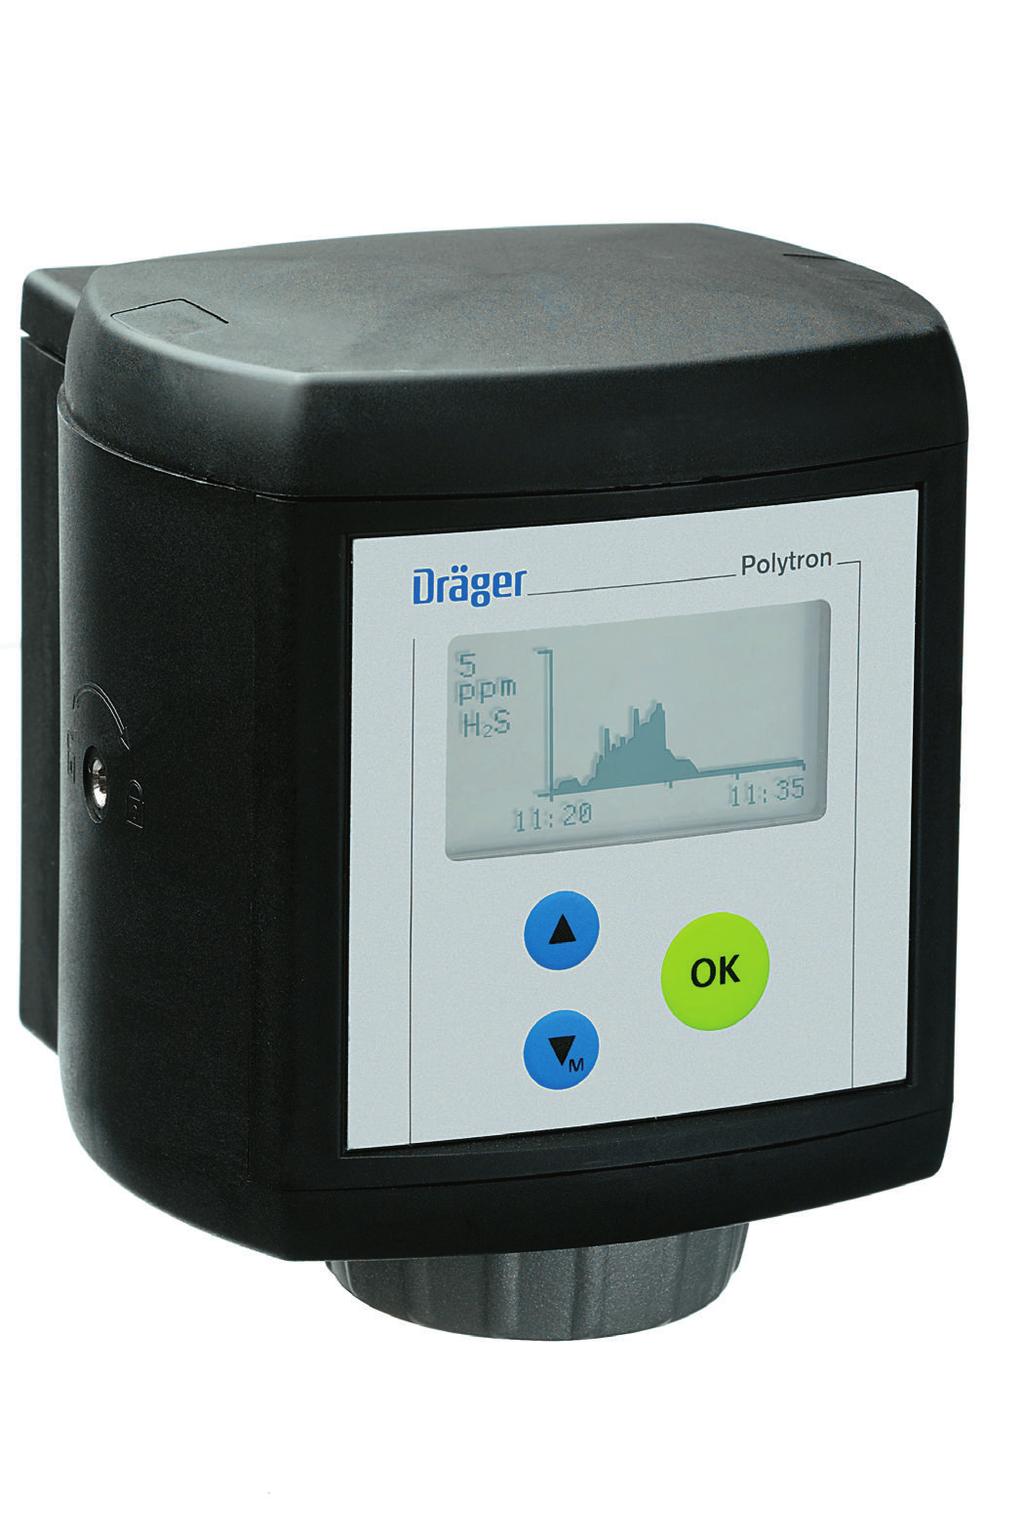 Dräger Polytron 7000 Detection of toic gases and oygen The Dräger Polytron 7000 is a gas detector that can satisfy many toic and oygen gas measurement applications on a single platform It meets the